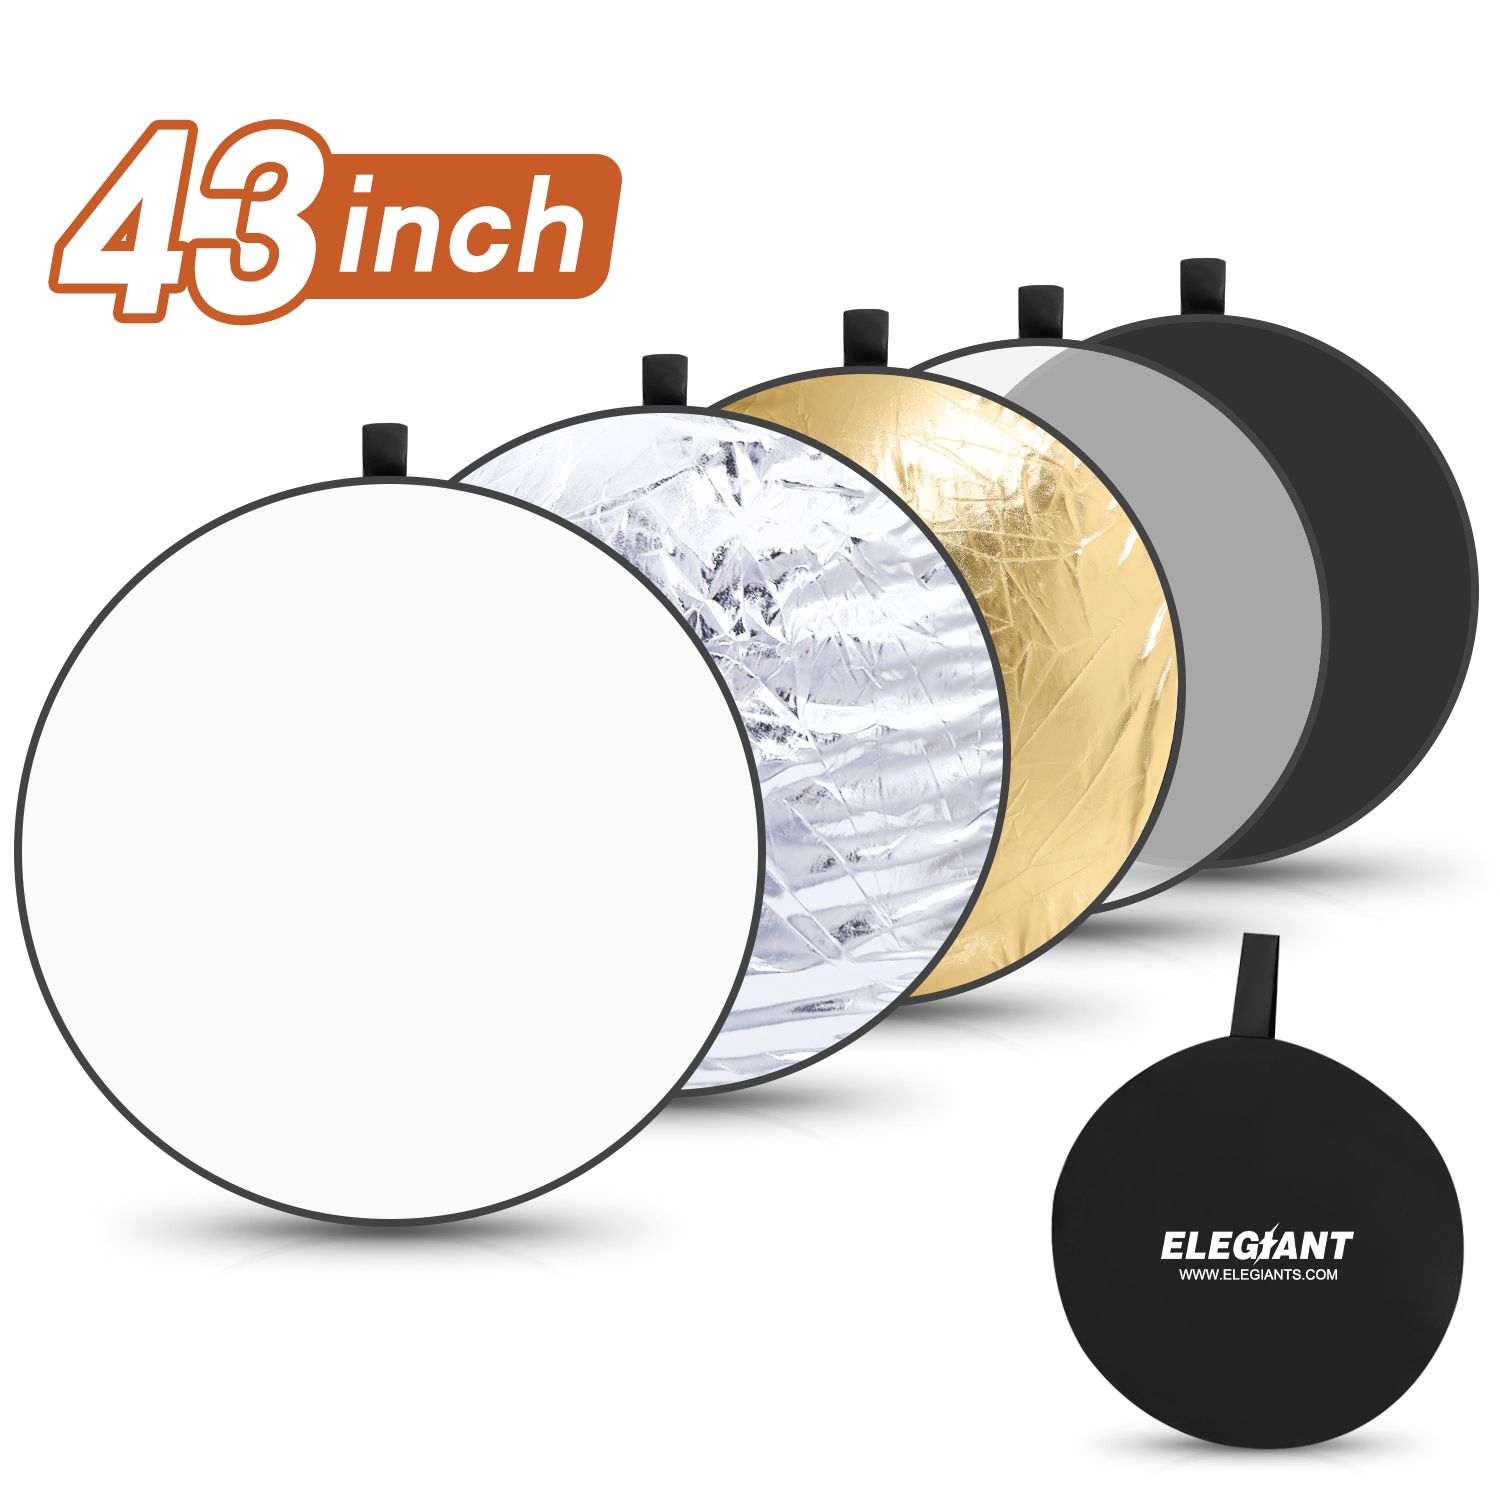 ELEGIANT-EGP-B04-5-in1-43-Inch110cm-Light-Reflector-for-Photography-Portable-Photo-Reflector-Collaps-1723724